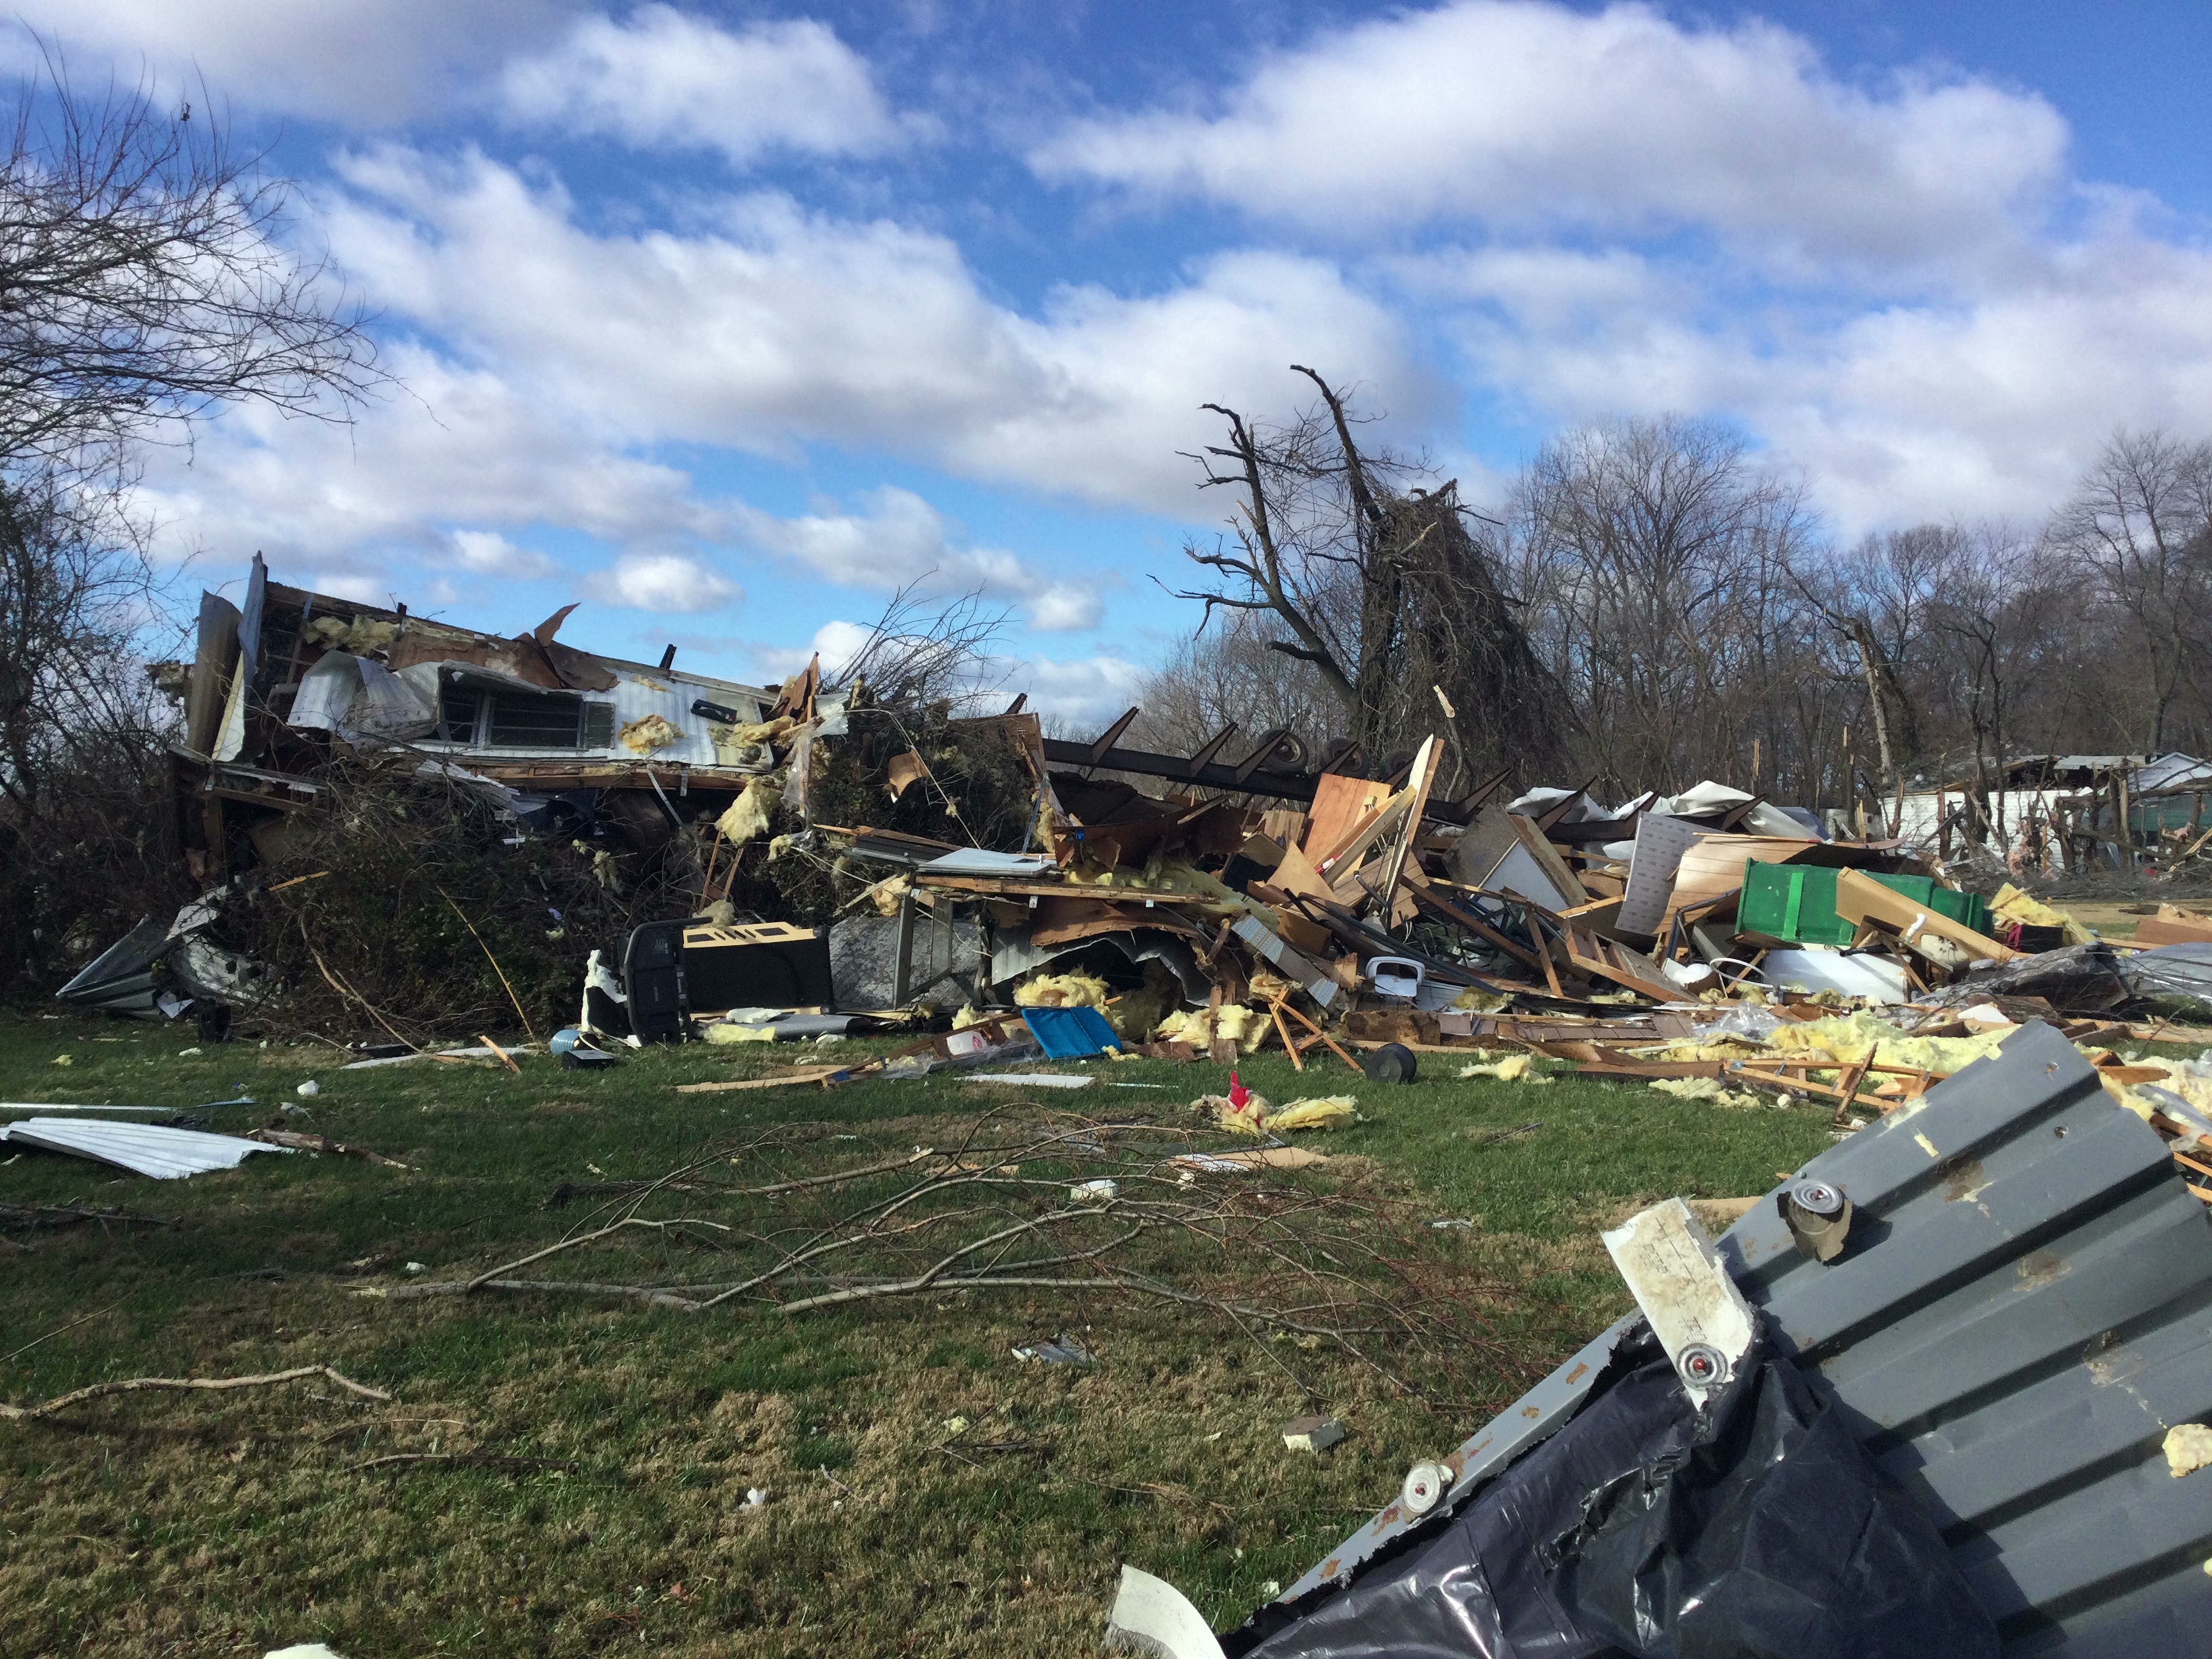 Mobile home is destroyed near Edwardsville, Illinois